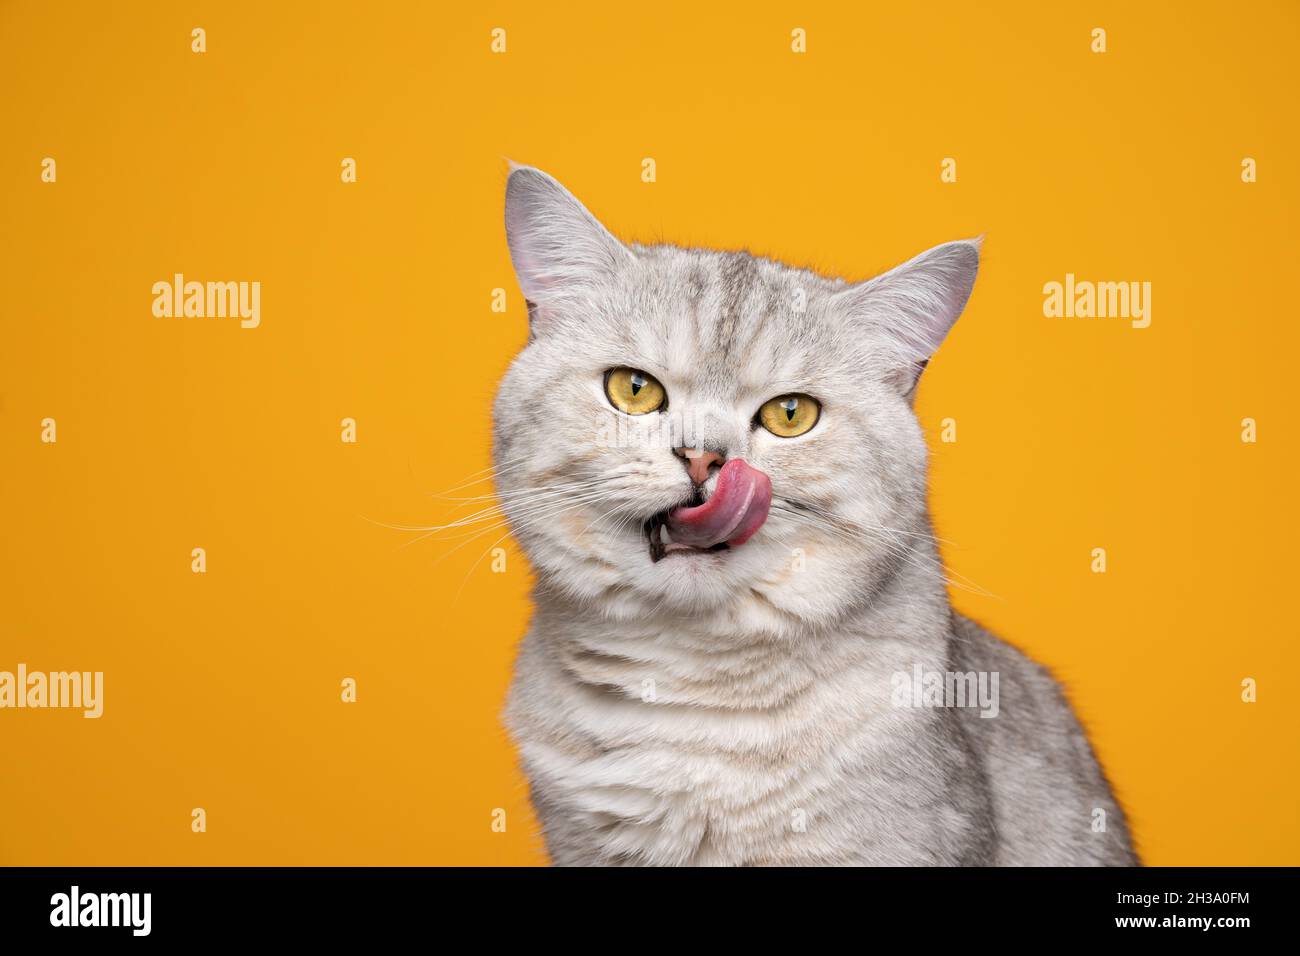 hungry silver tabby shaded british shorthair cat sticking out tongue licking lips on yellow background Stock Photo